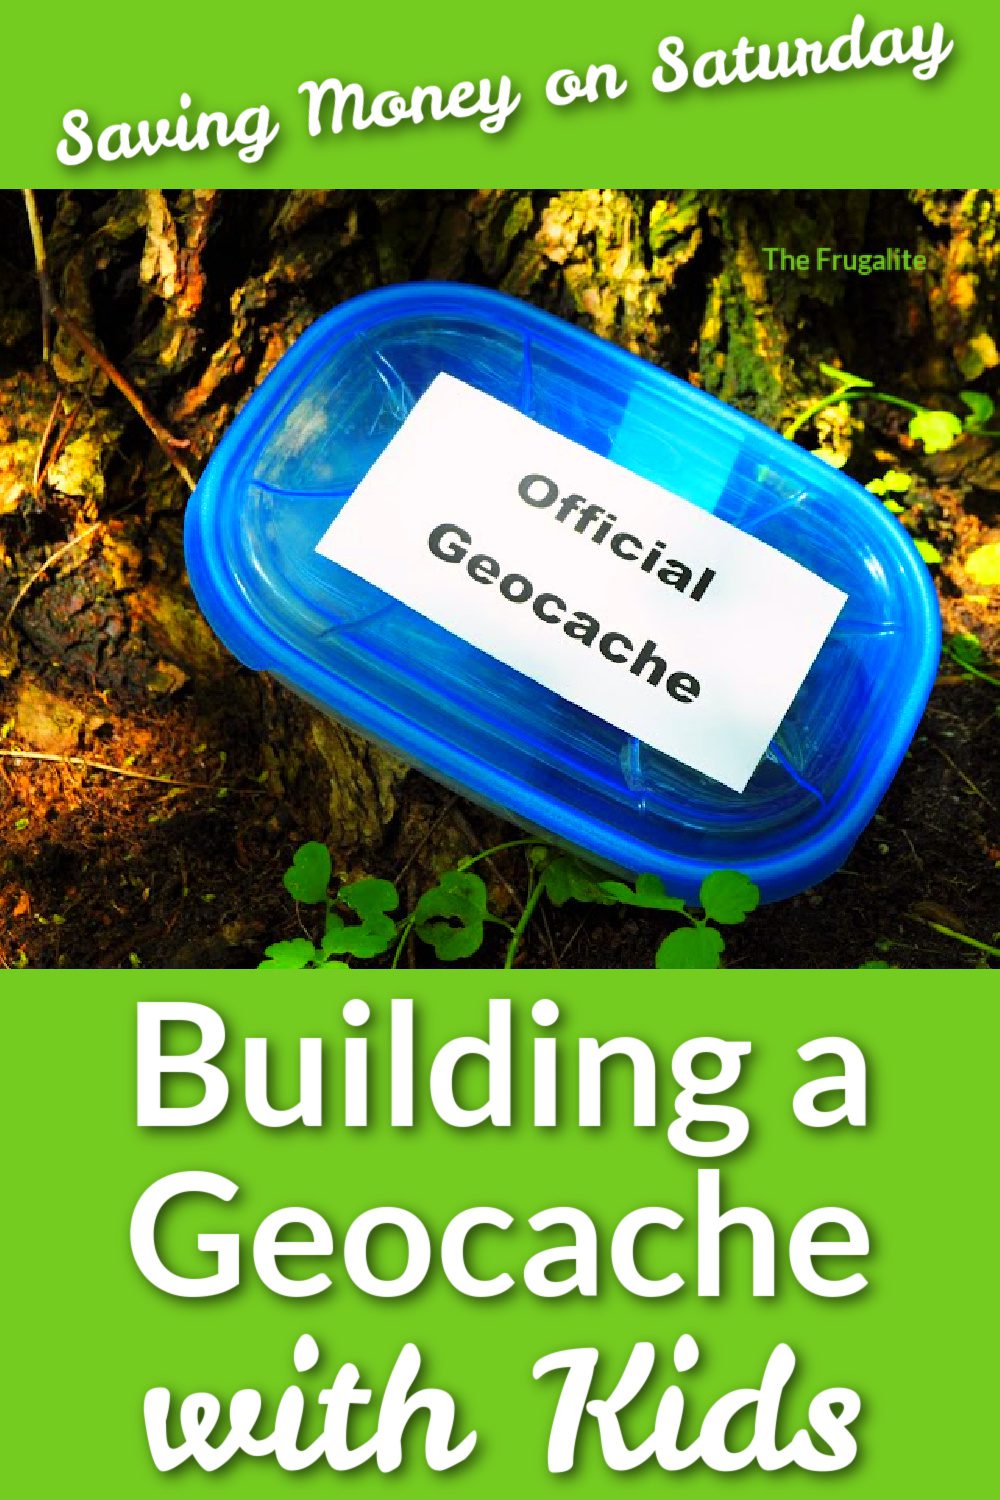 Saving Money on Saturday: Building a Geocache with Kids